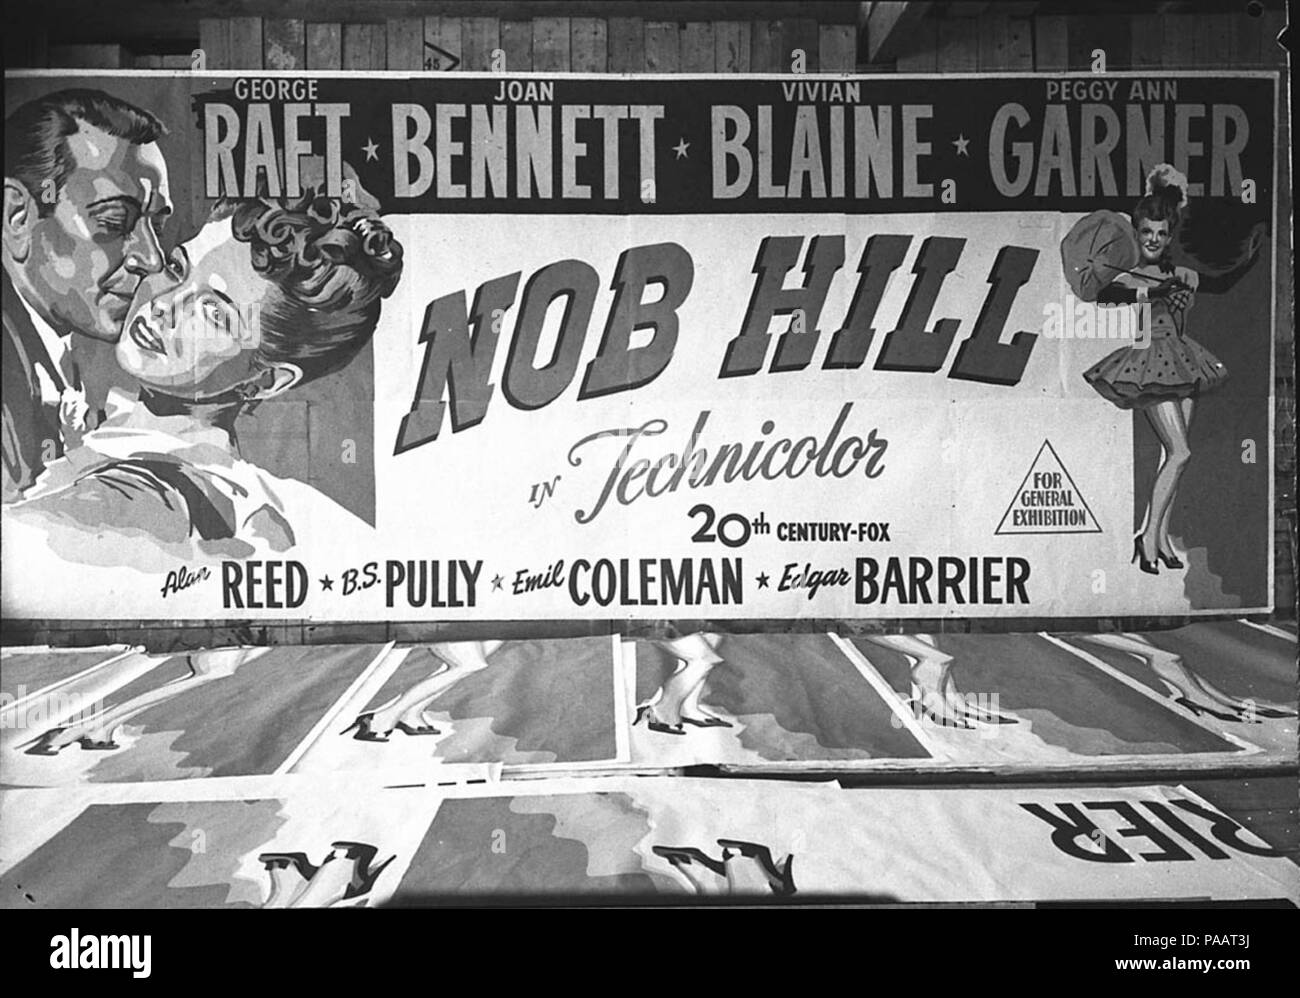 239 SLNSW 13495 Nob Hill poster with George Raft Joan Bennett Vivian Blaine Peggy Ann Garner Alan Reed BS Pully Emil Coleman and Edgar Barrier British Empire Films and Fox Films Stock Photo